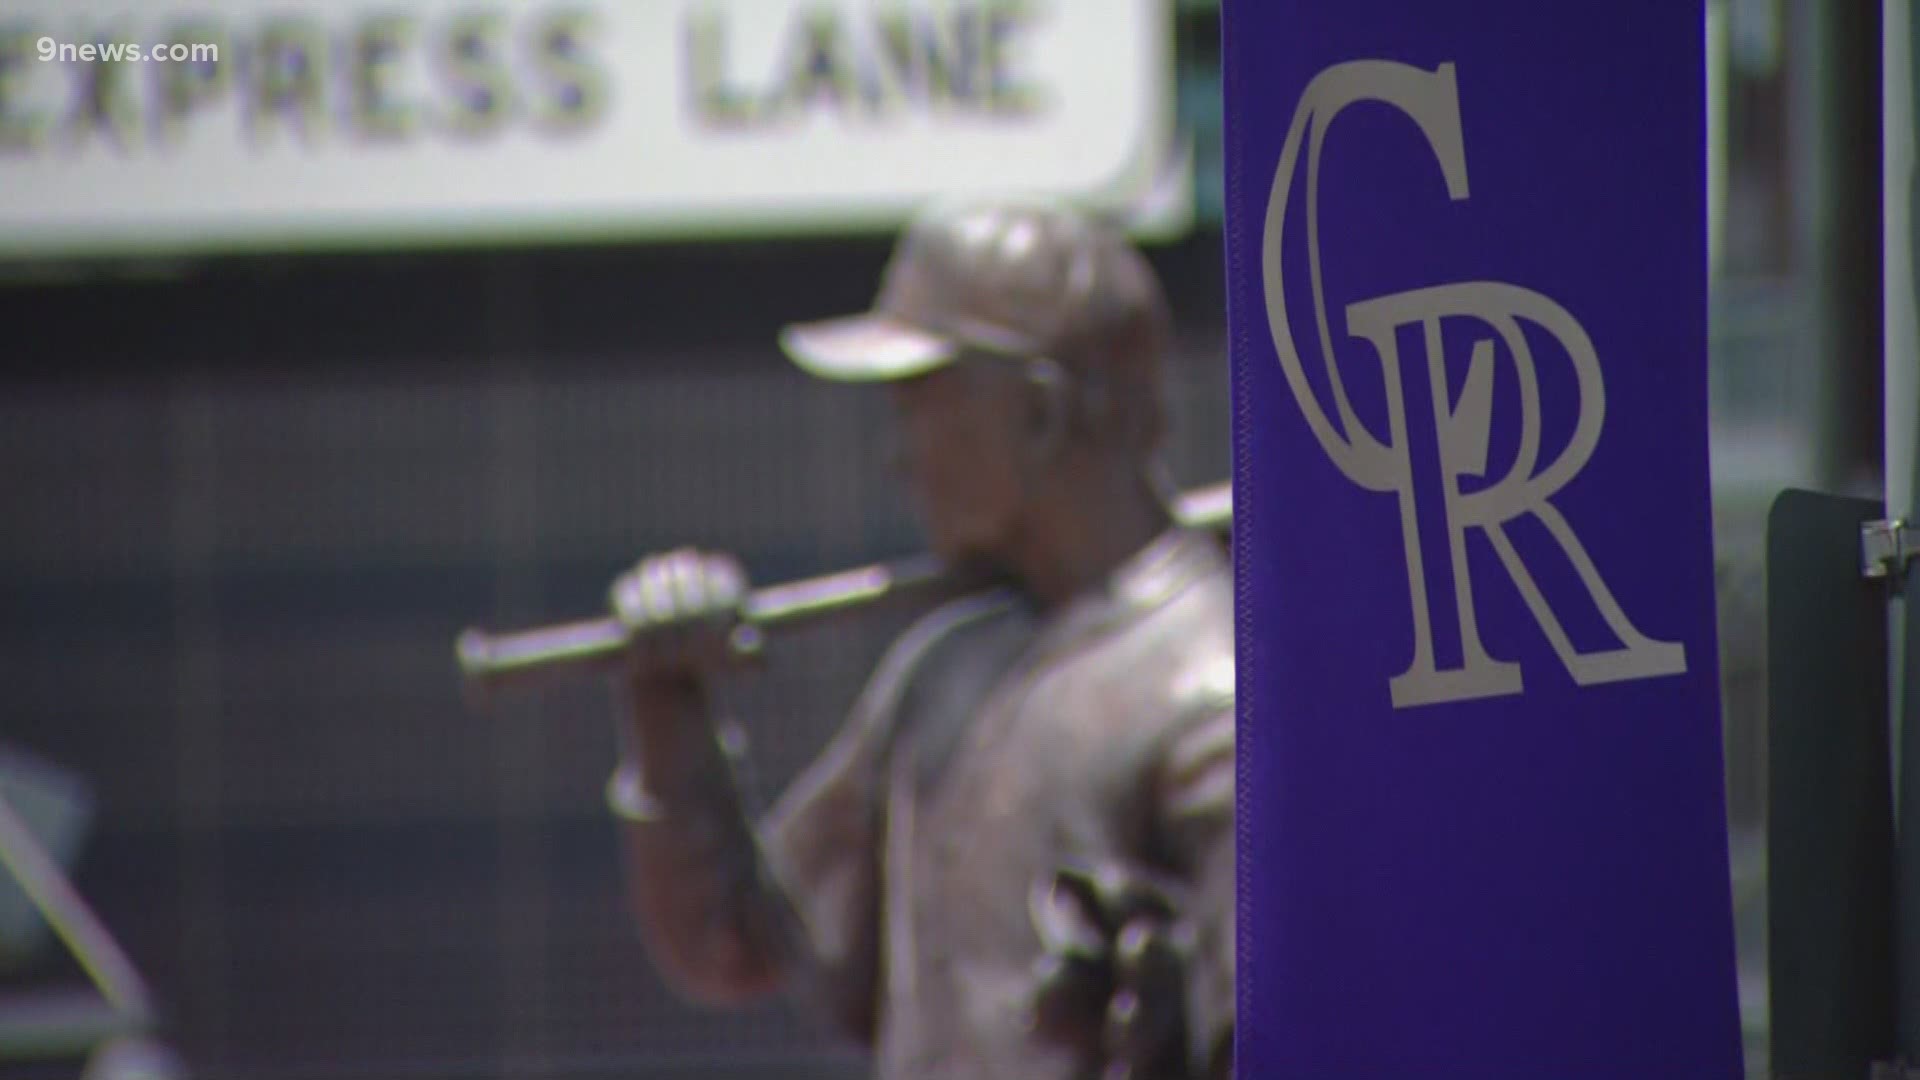 The Rockies are calling the June 28 matchup against the Pittsburgh Pirates "Opening Day 2.0."